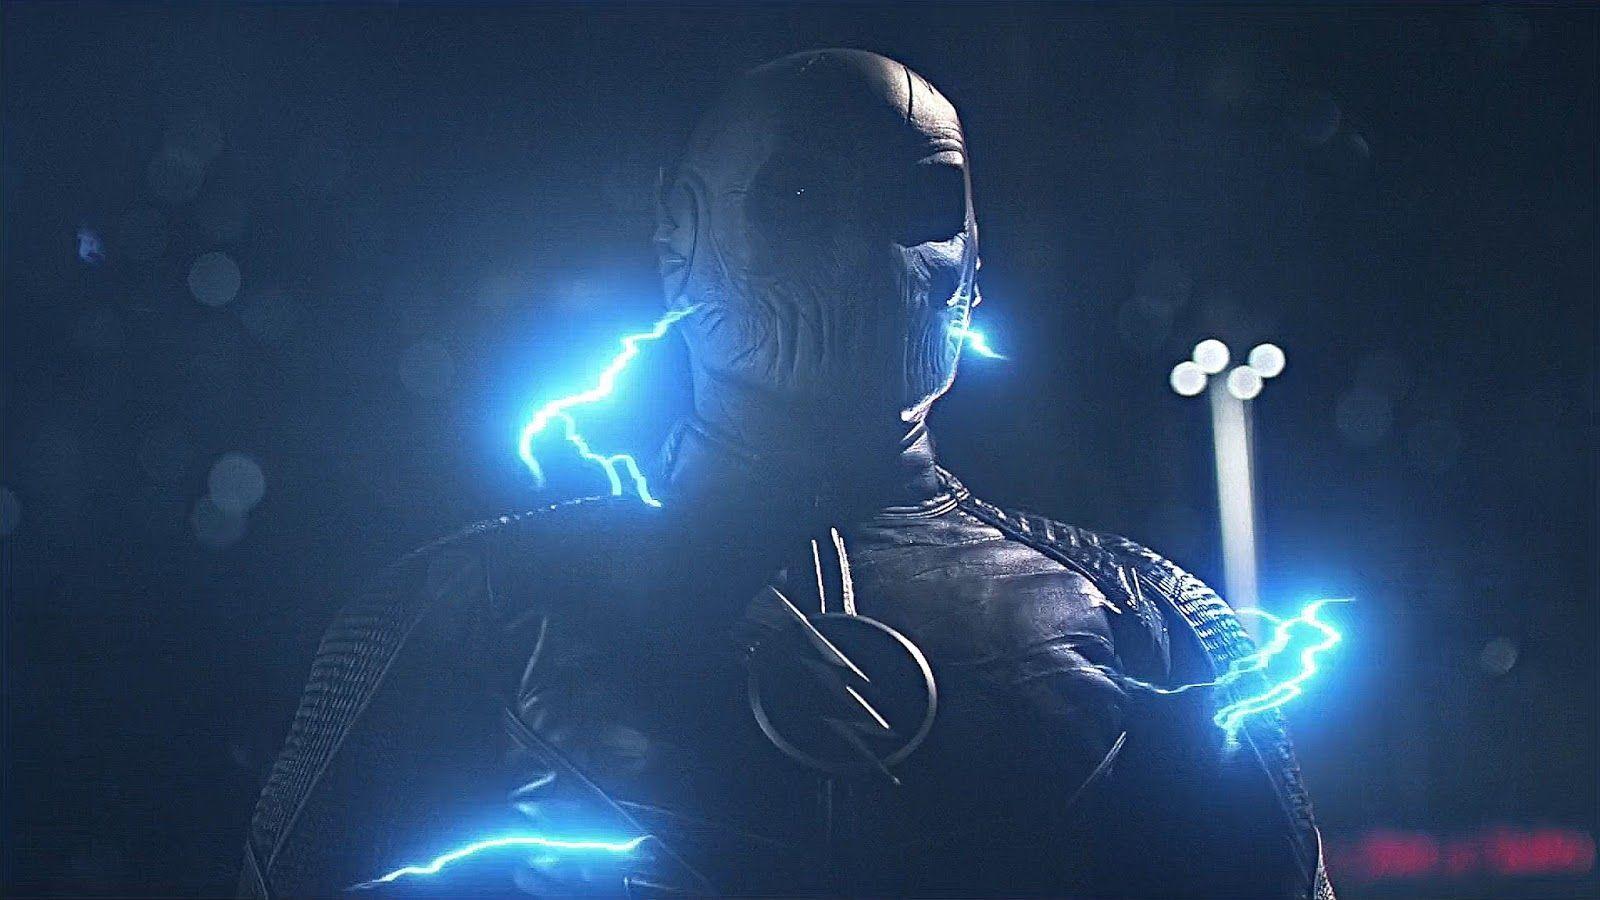 The Flash Zoom 4K Wallpaper Free The Flash Zoom 4K Background